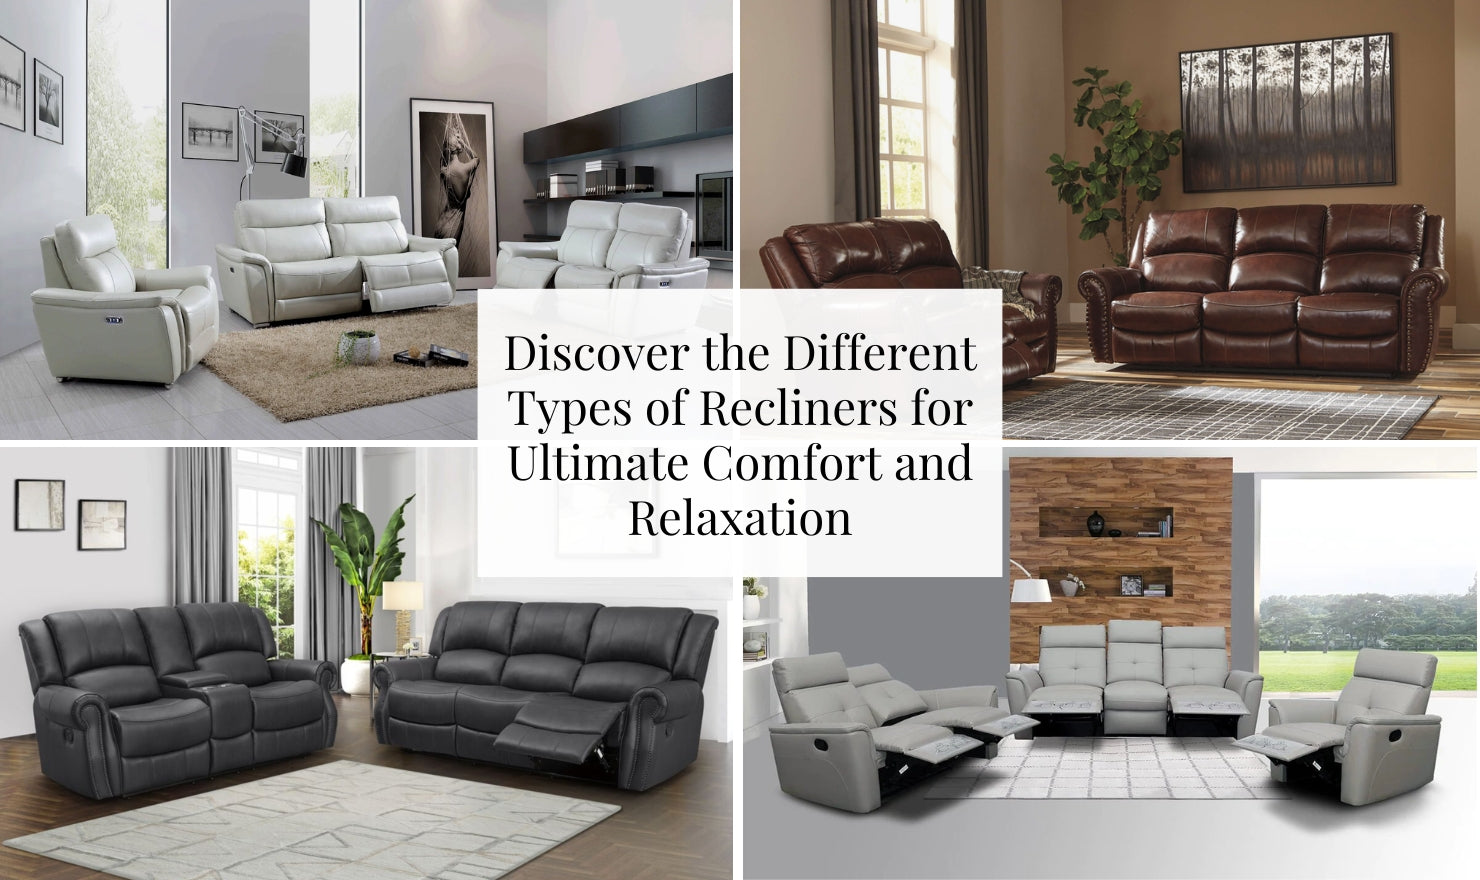 Discover the Different Types of Recliners for Ultimate Comfort and Relaxation